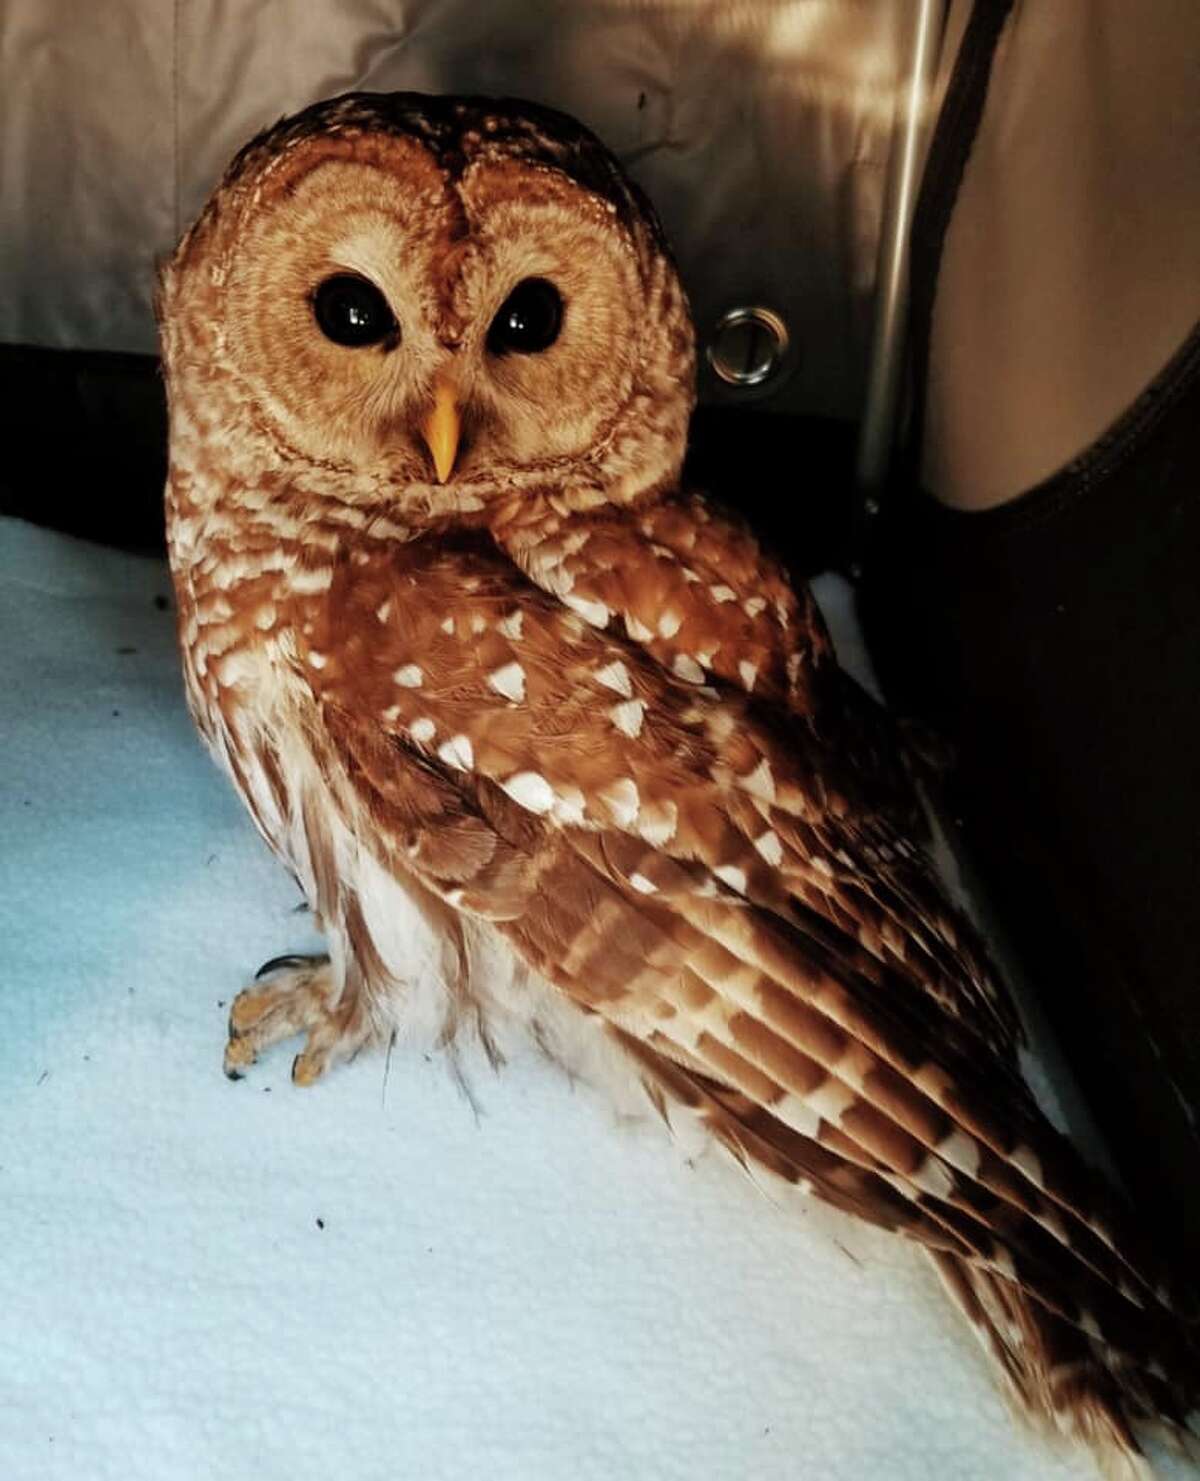 A Hamden police officer rescued this owl found on Elmer Avenue Wednesday, Feb. 20, 2019.